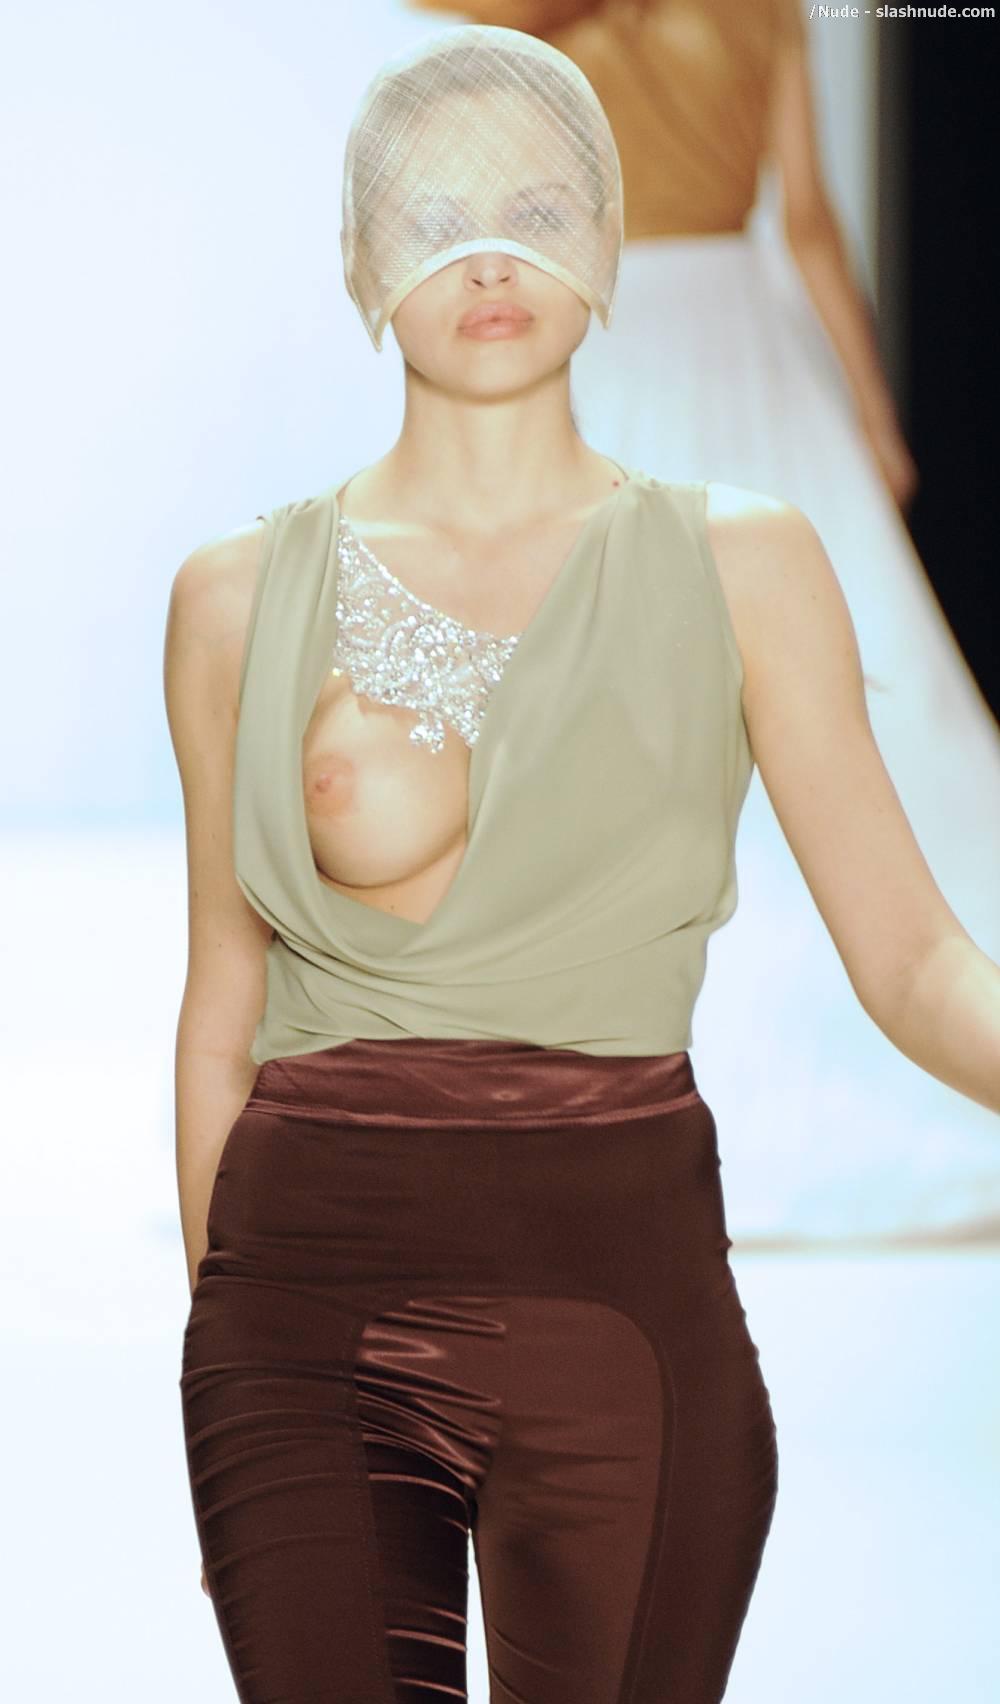 Hana Nitsche Breast Slips Out Of Her Top On Runway 7